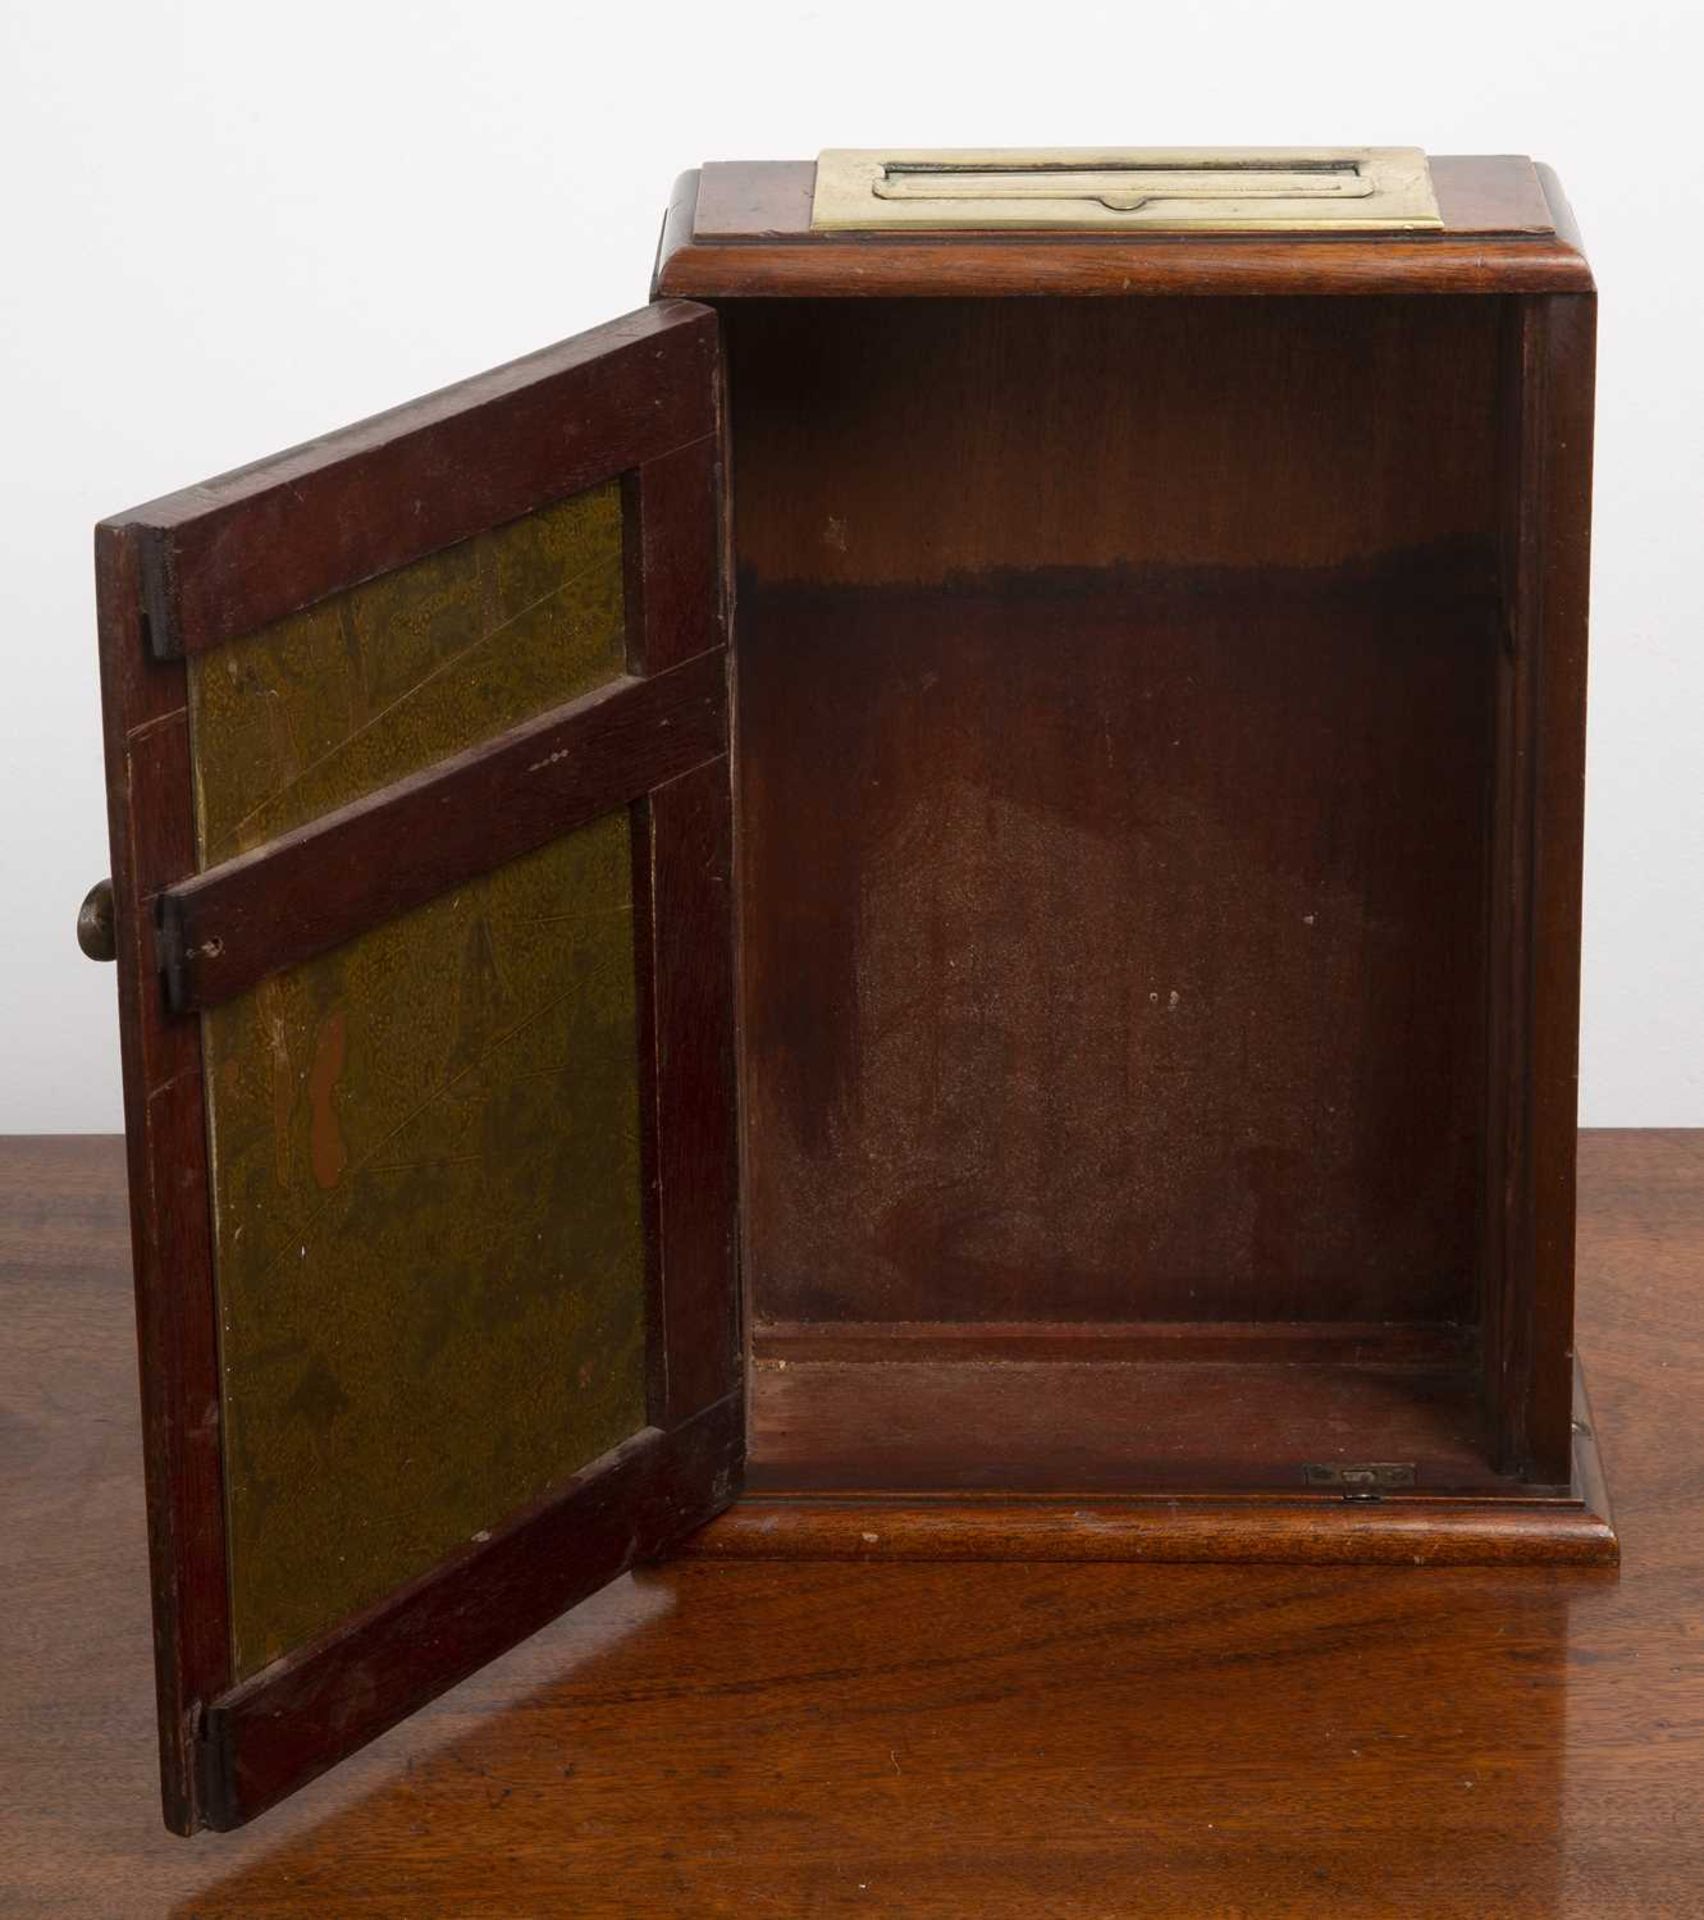 Mahogany and brass fronted ballot/vote box late 19th/early 20th Century, 25cm wide x 34cm high x - Image 4 of 5